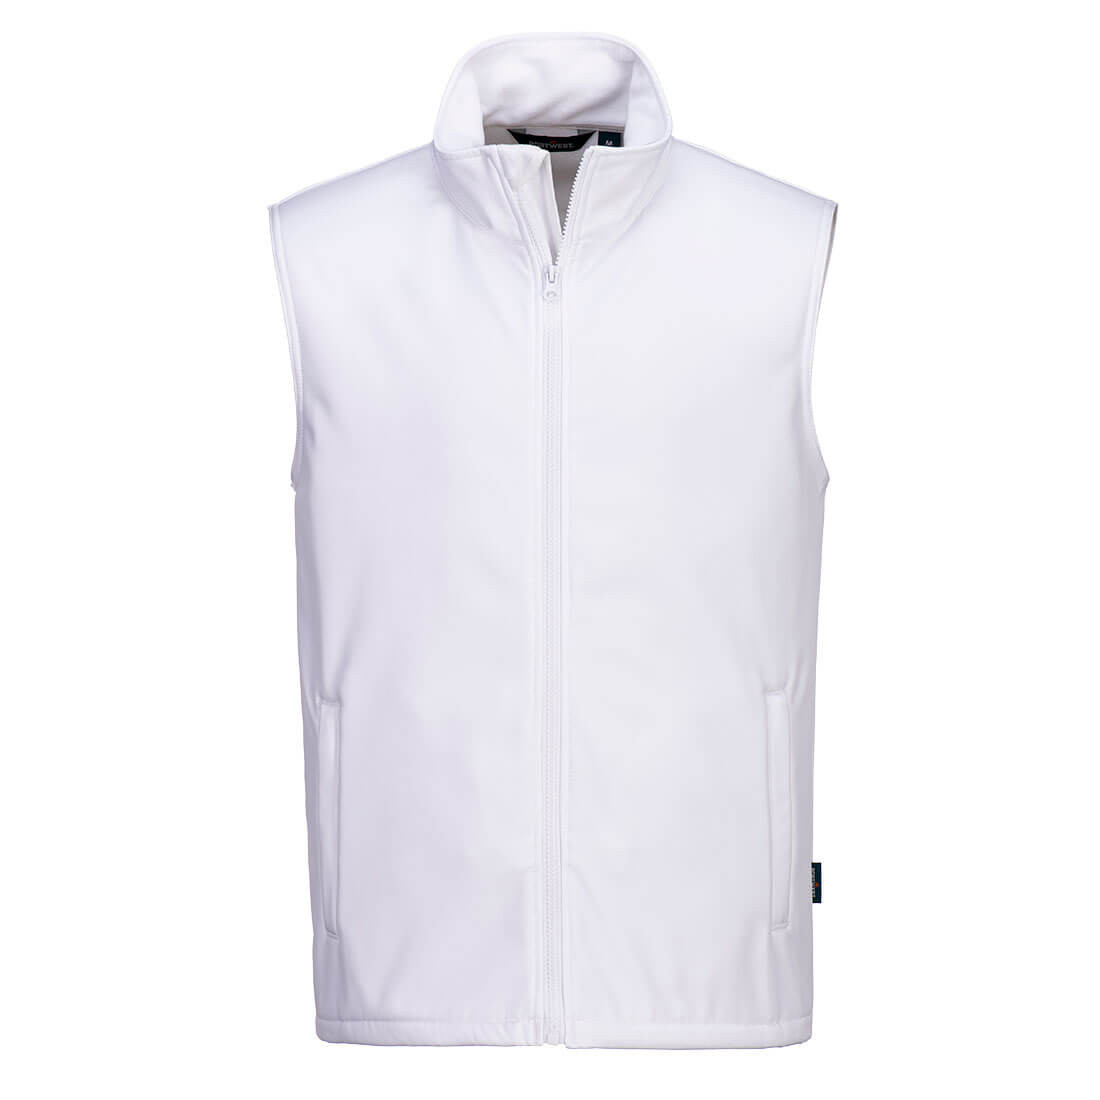 Print and Promo Softshell Gilet (2L) - Safetywear